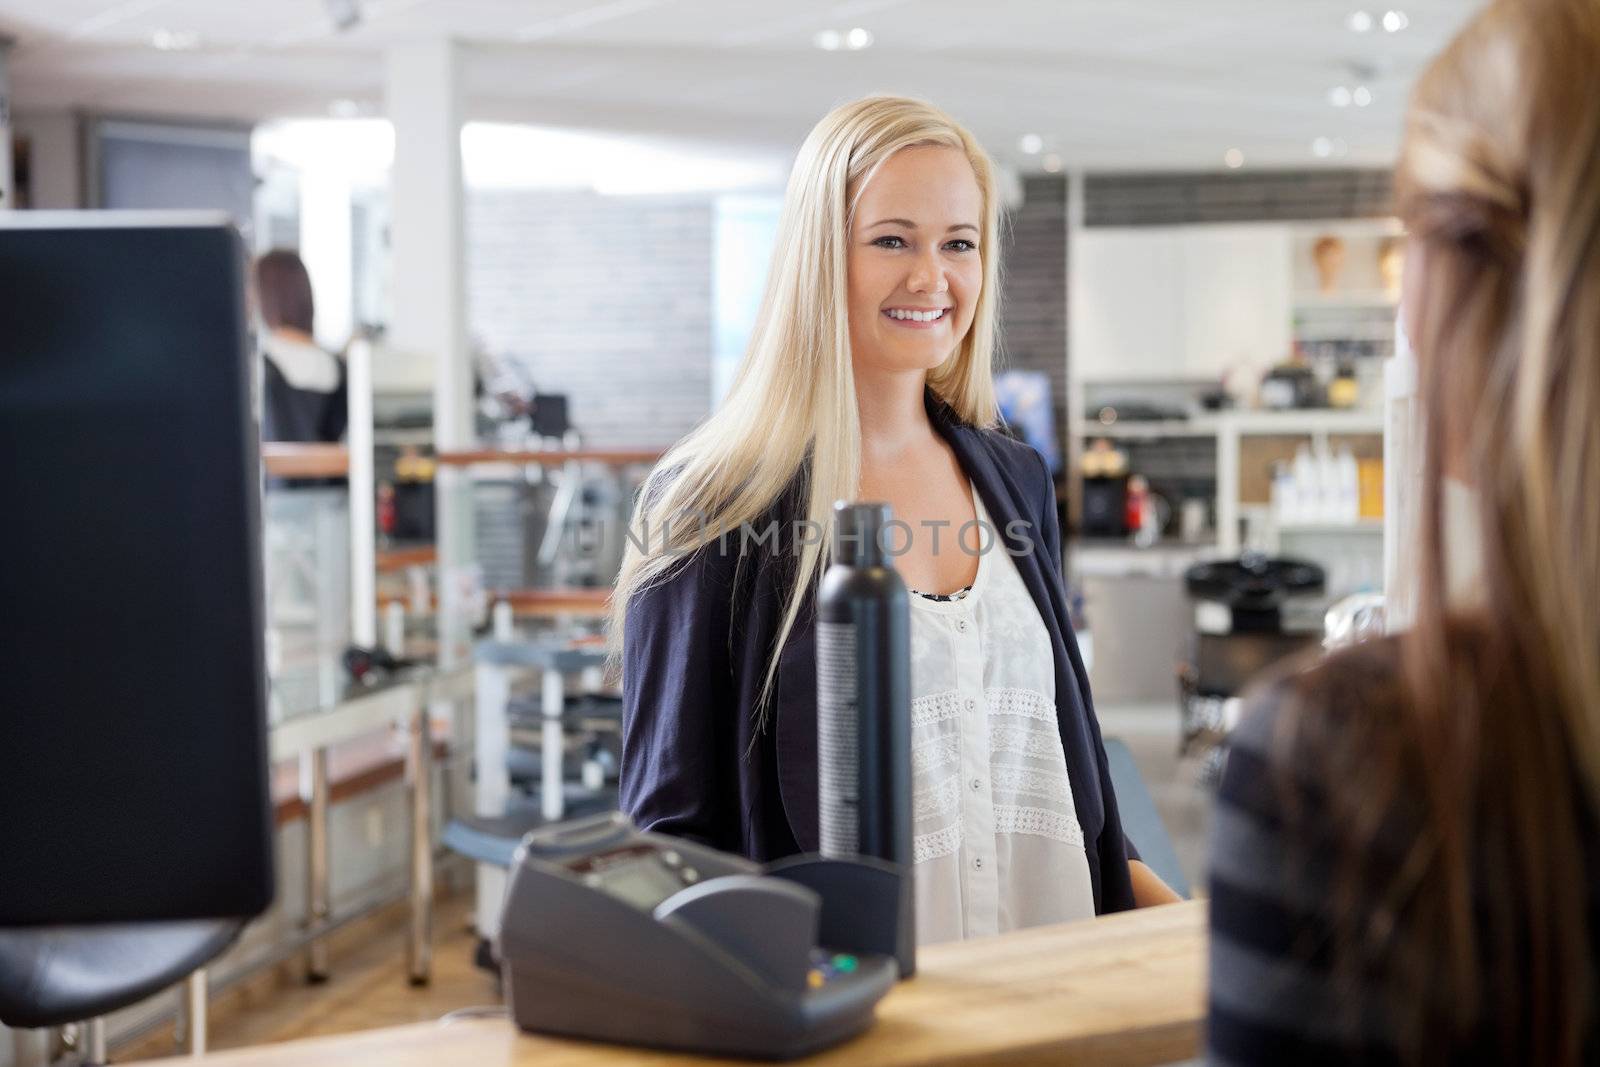 Woman At Cash Counter by leaf